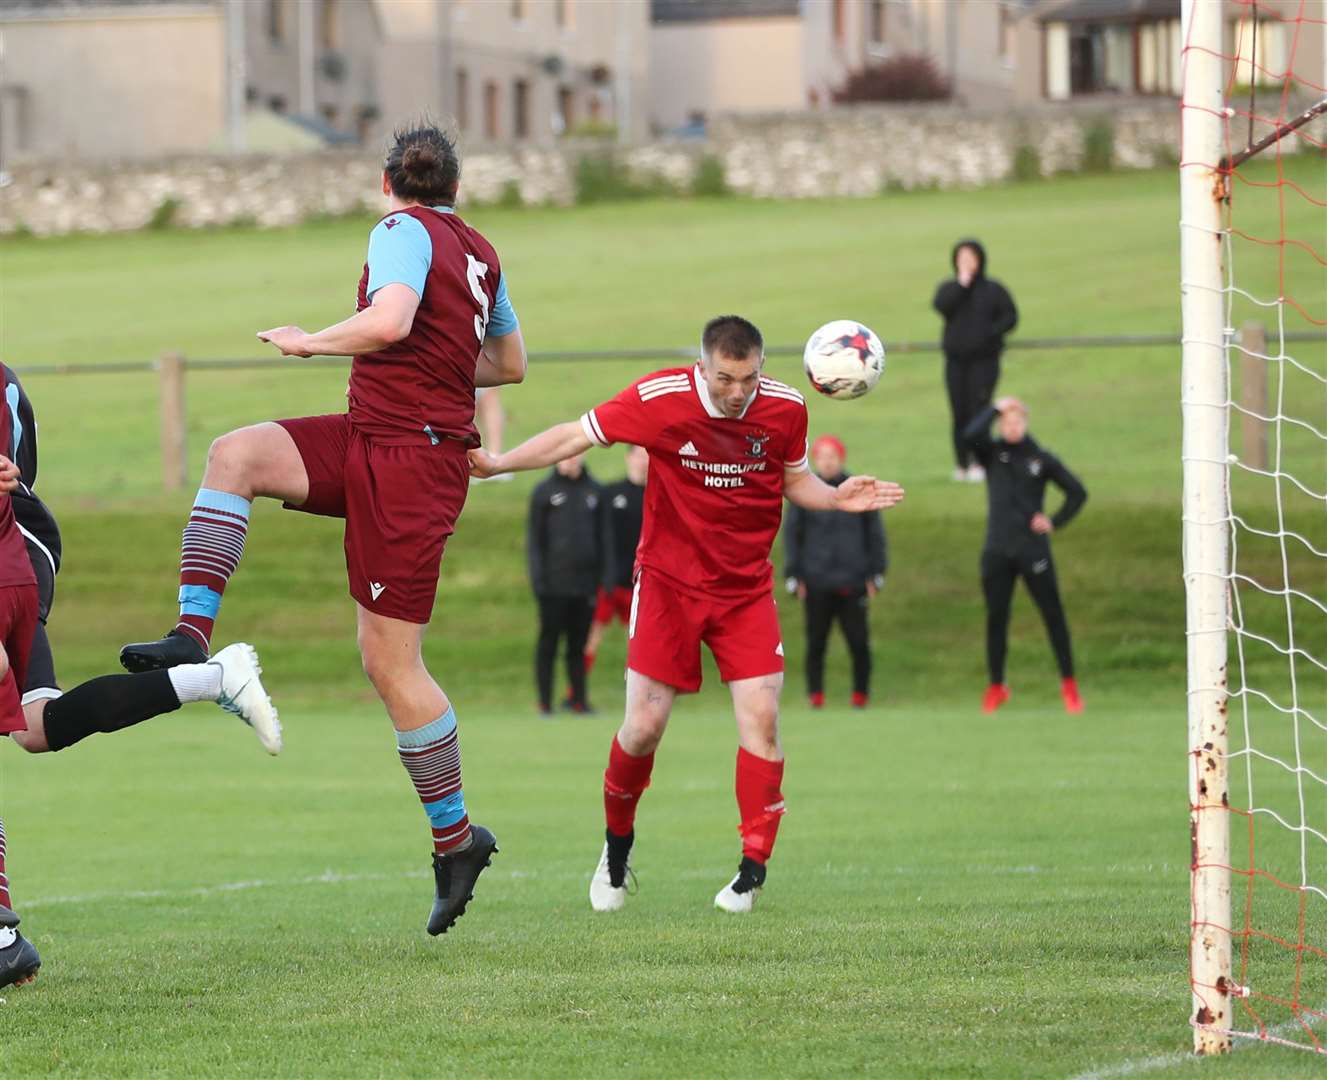 Wick Groats' John Budge heads the ball in from a corner to make it 1-1 in the top-of-the-table clash. Picture: James Gunn